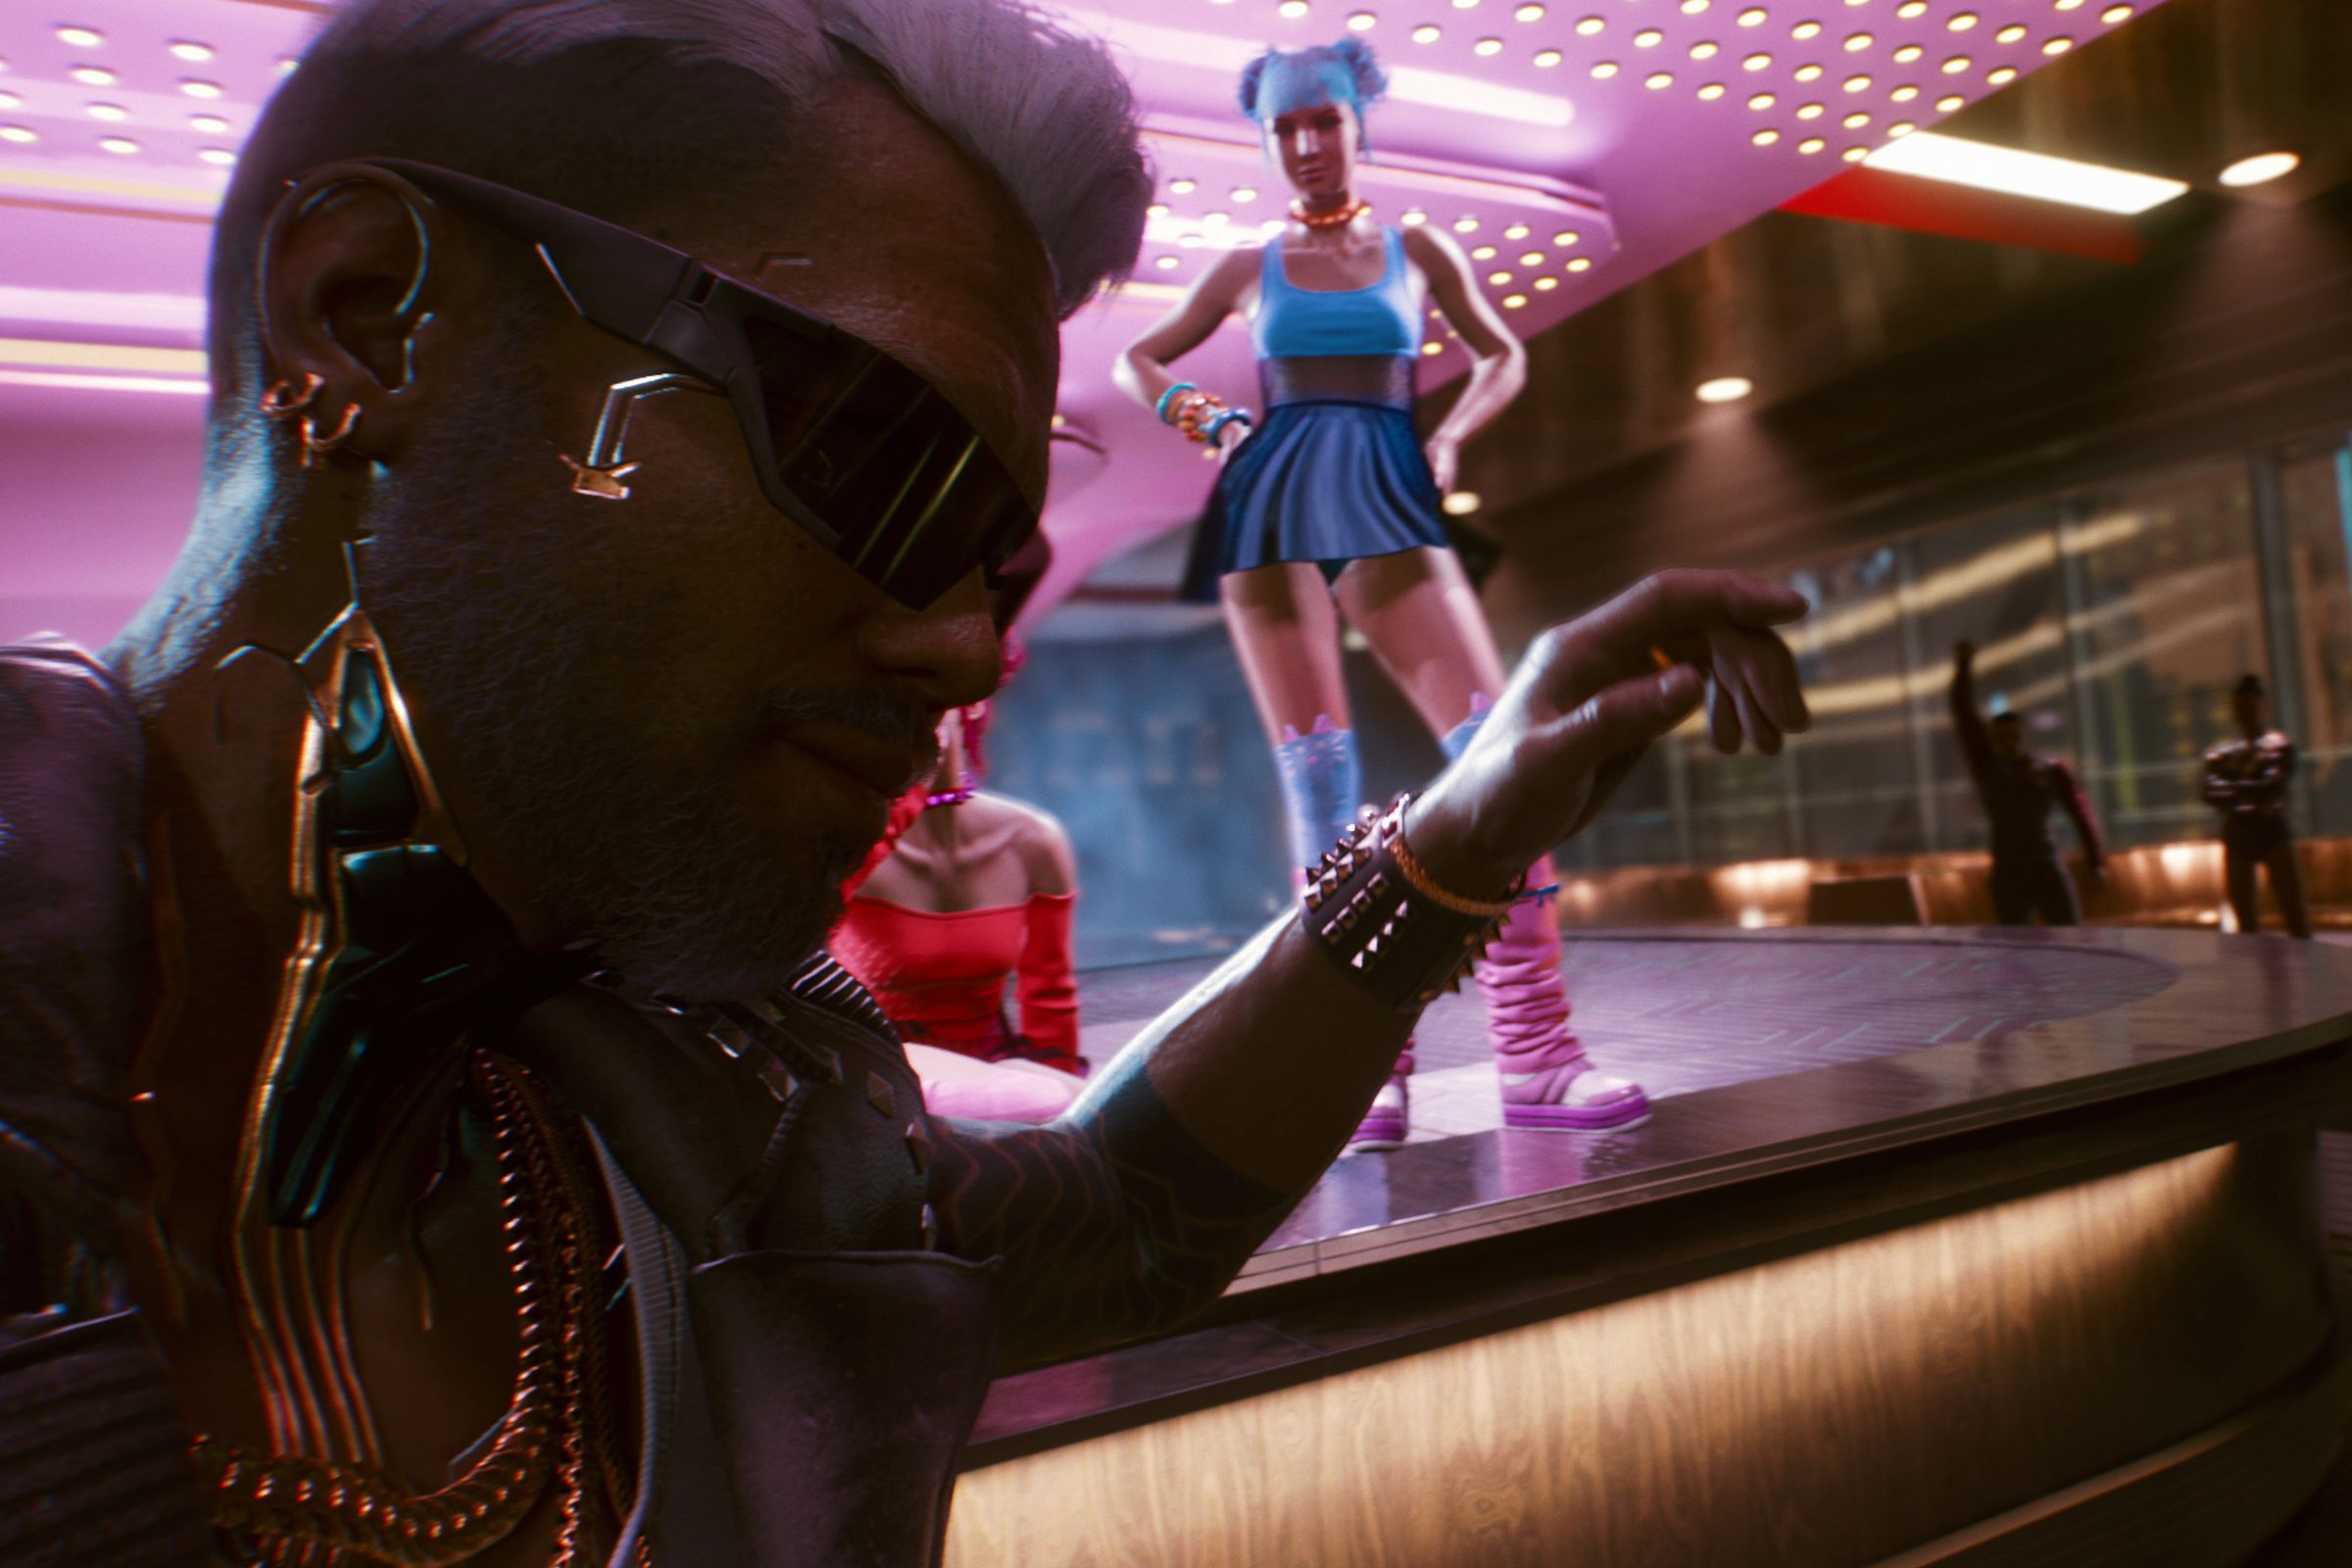 Jackie, your partner in Cyberpunk 2077, in front of a table dancer at a nightclub.